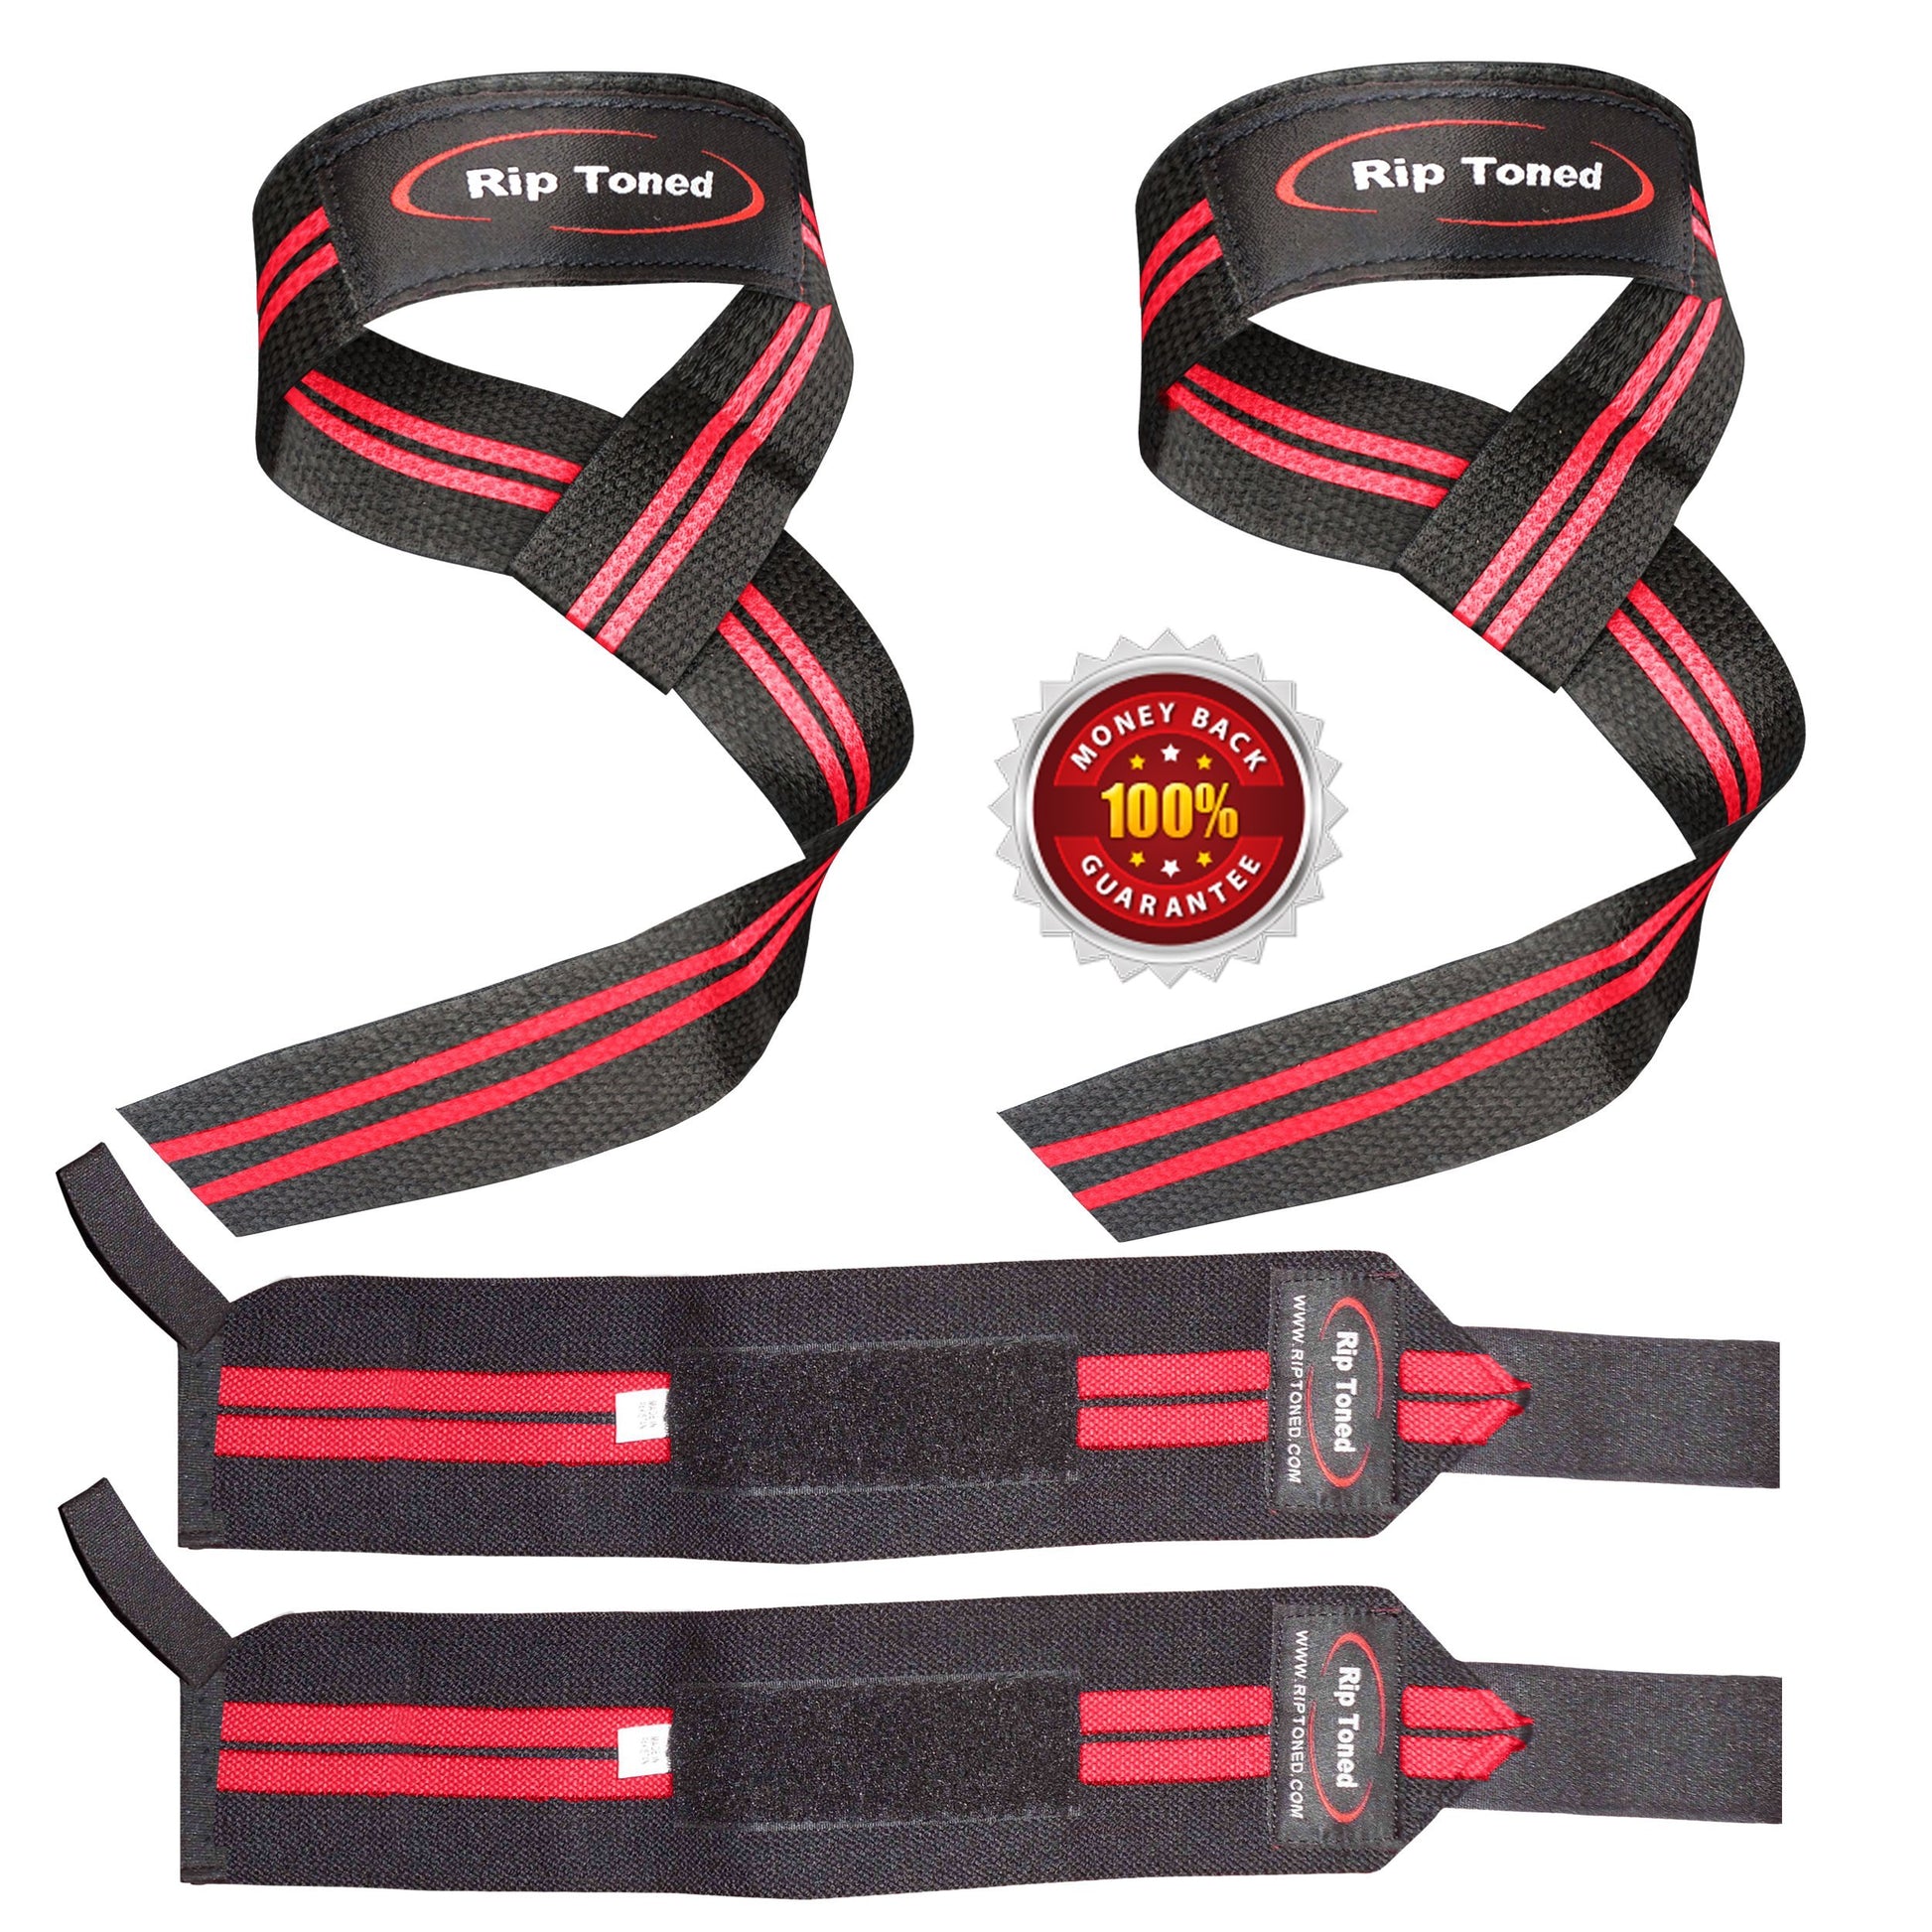 Lifting Straps & Wrist Wraps Combo Pack